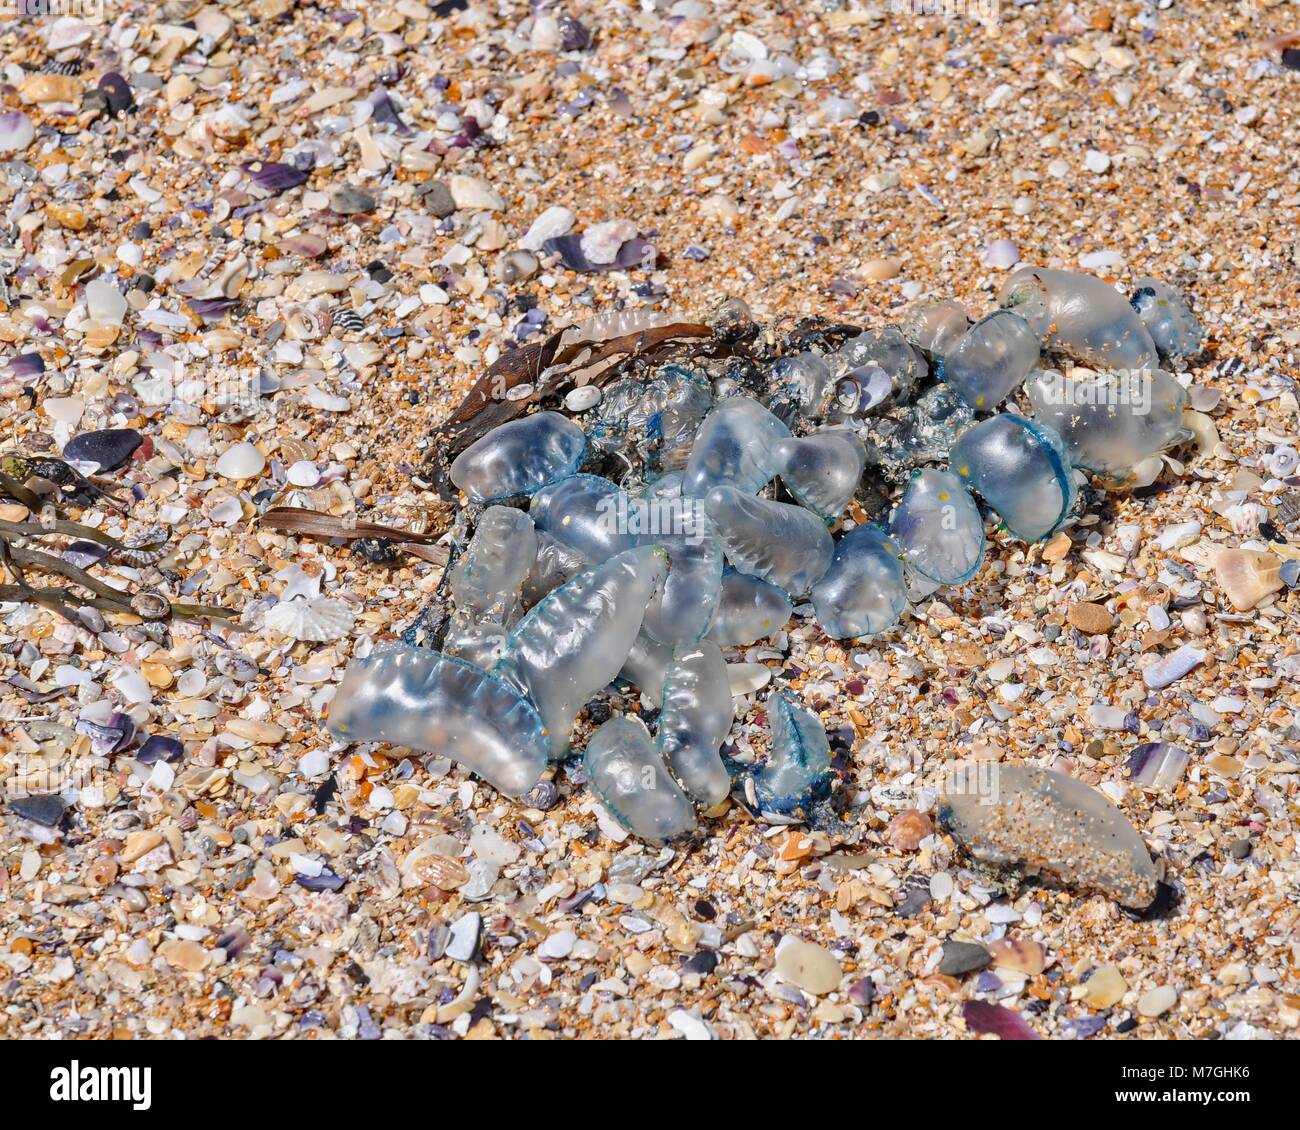 Bluebottles in a clump washed up on a shell grit covered beach. Stock Photo